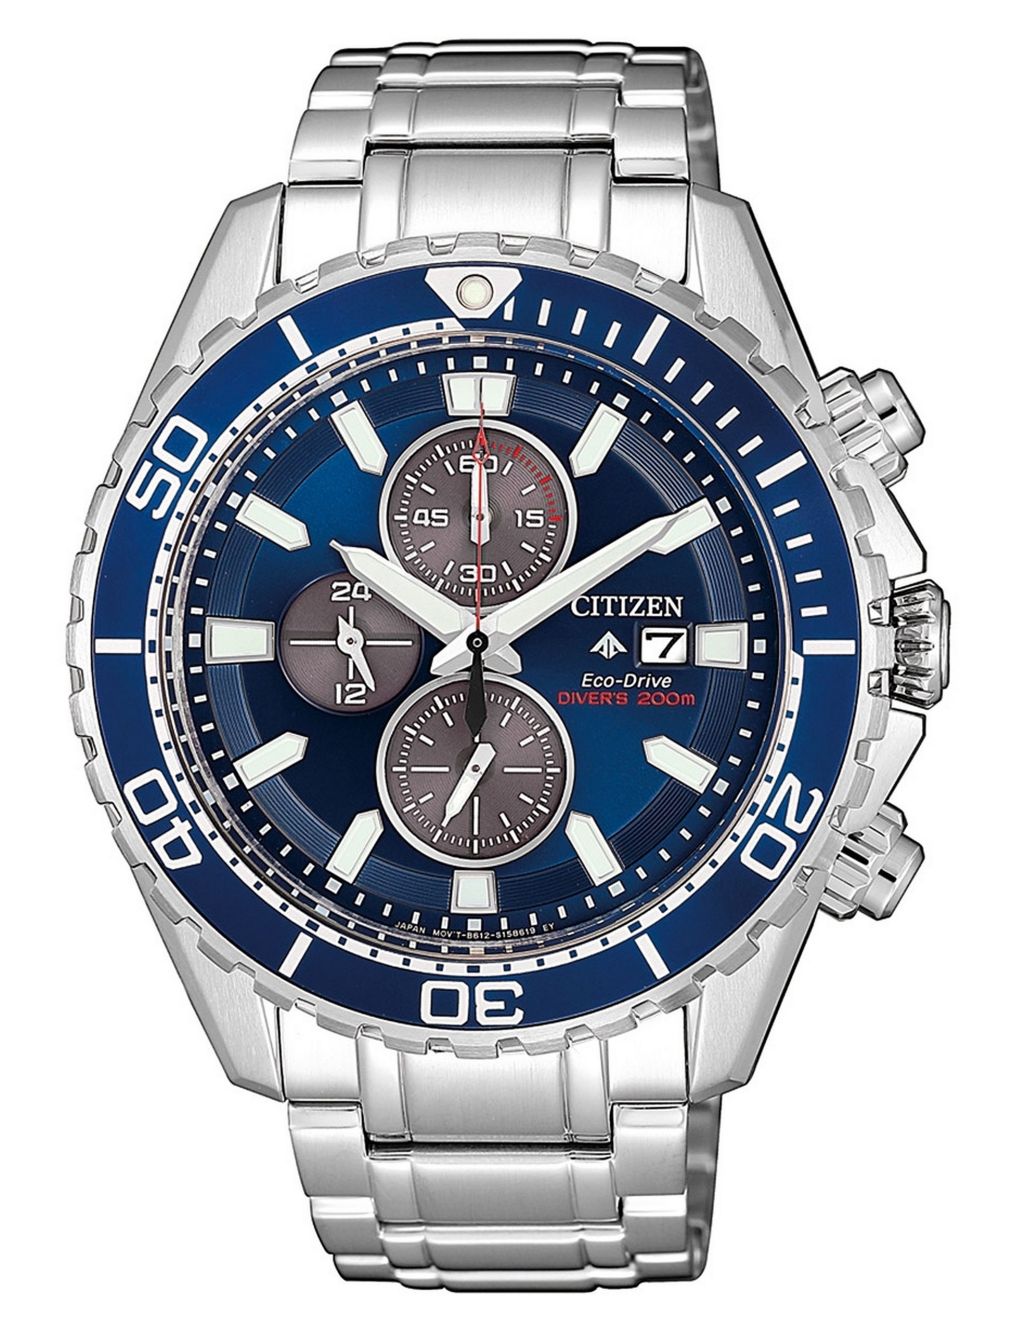 Citizen Promaster Diver's Stainless Steel Chronograph Watch image 1